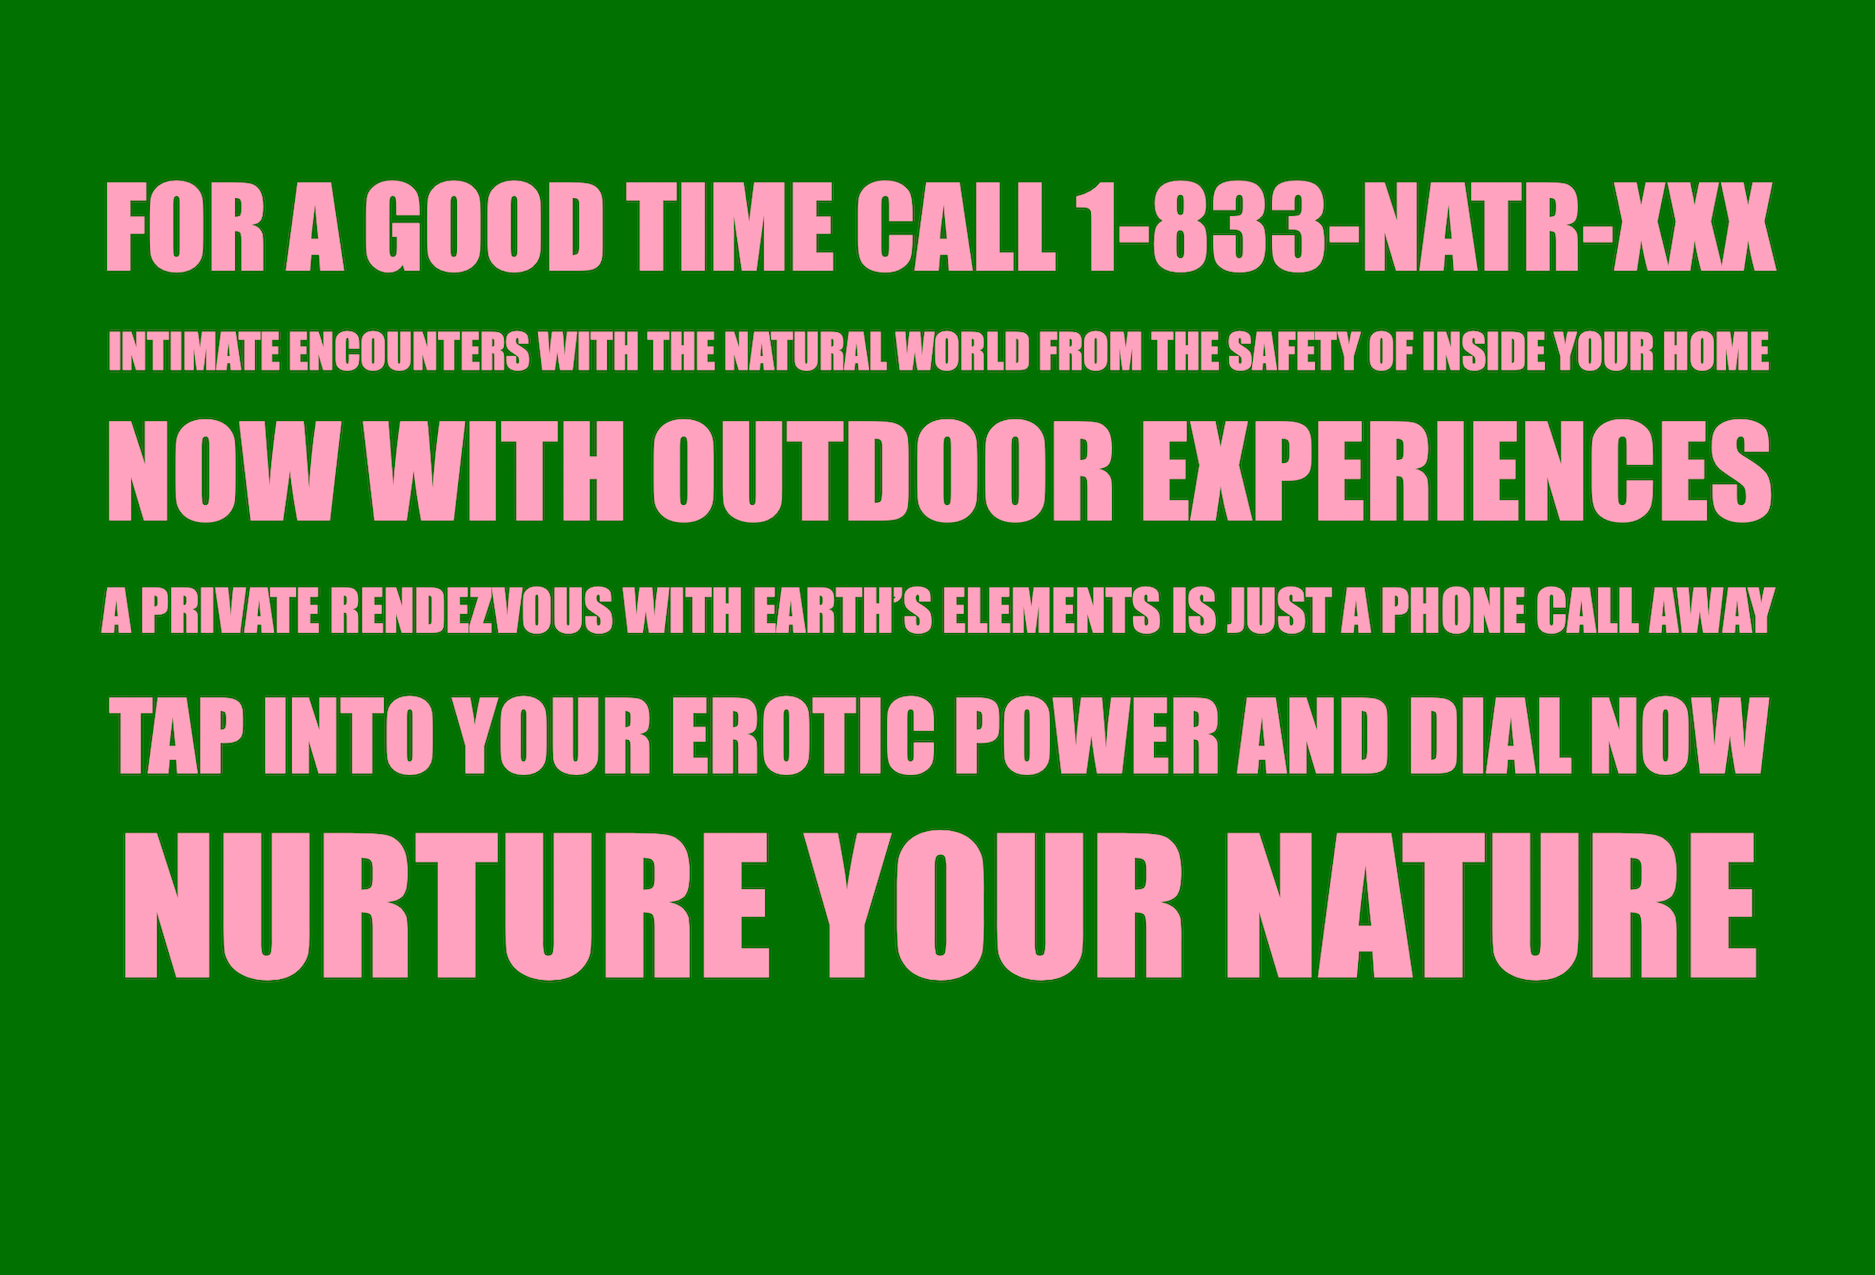 Pink text on a green background, stating: FOR A GOOD TIME CALL 1-833-NATR-XXX